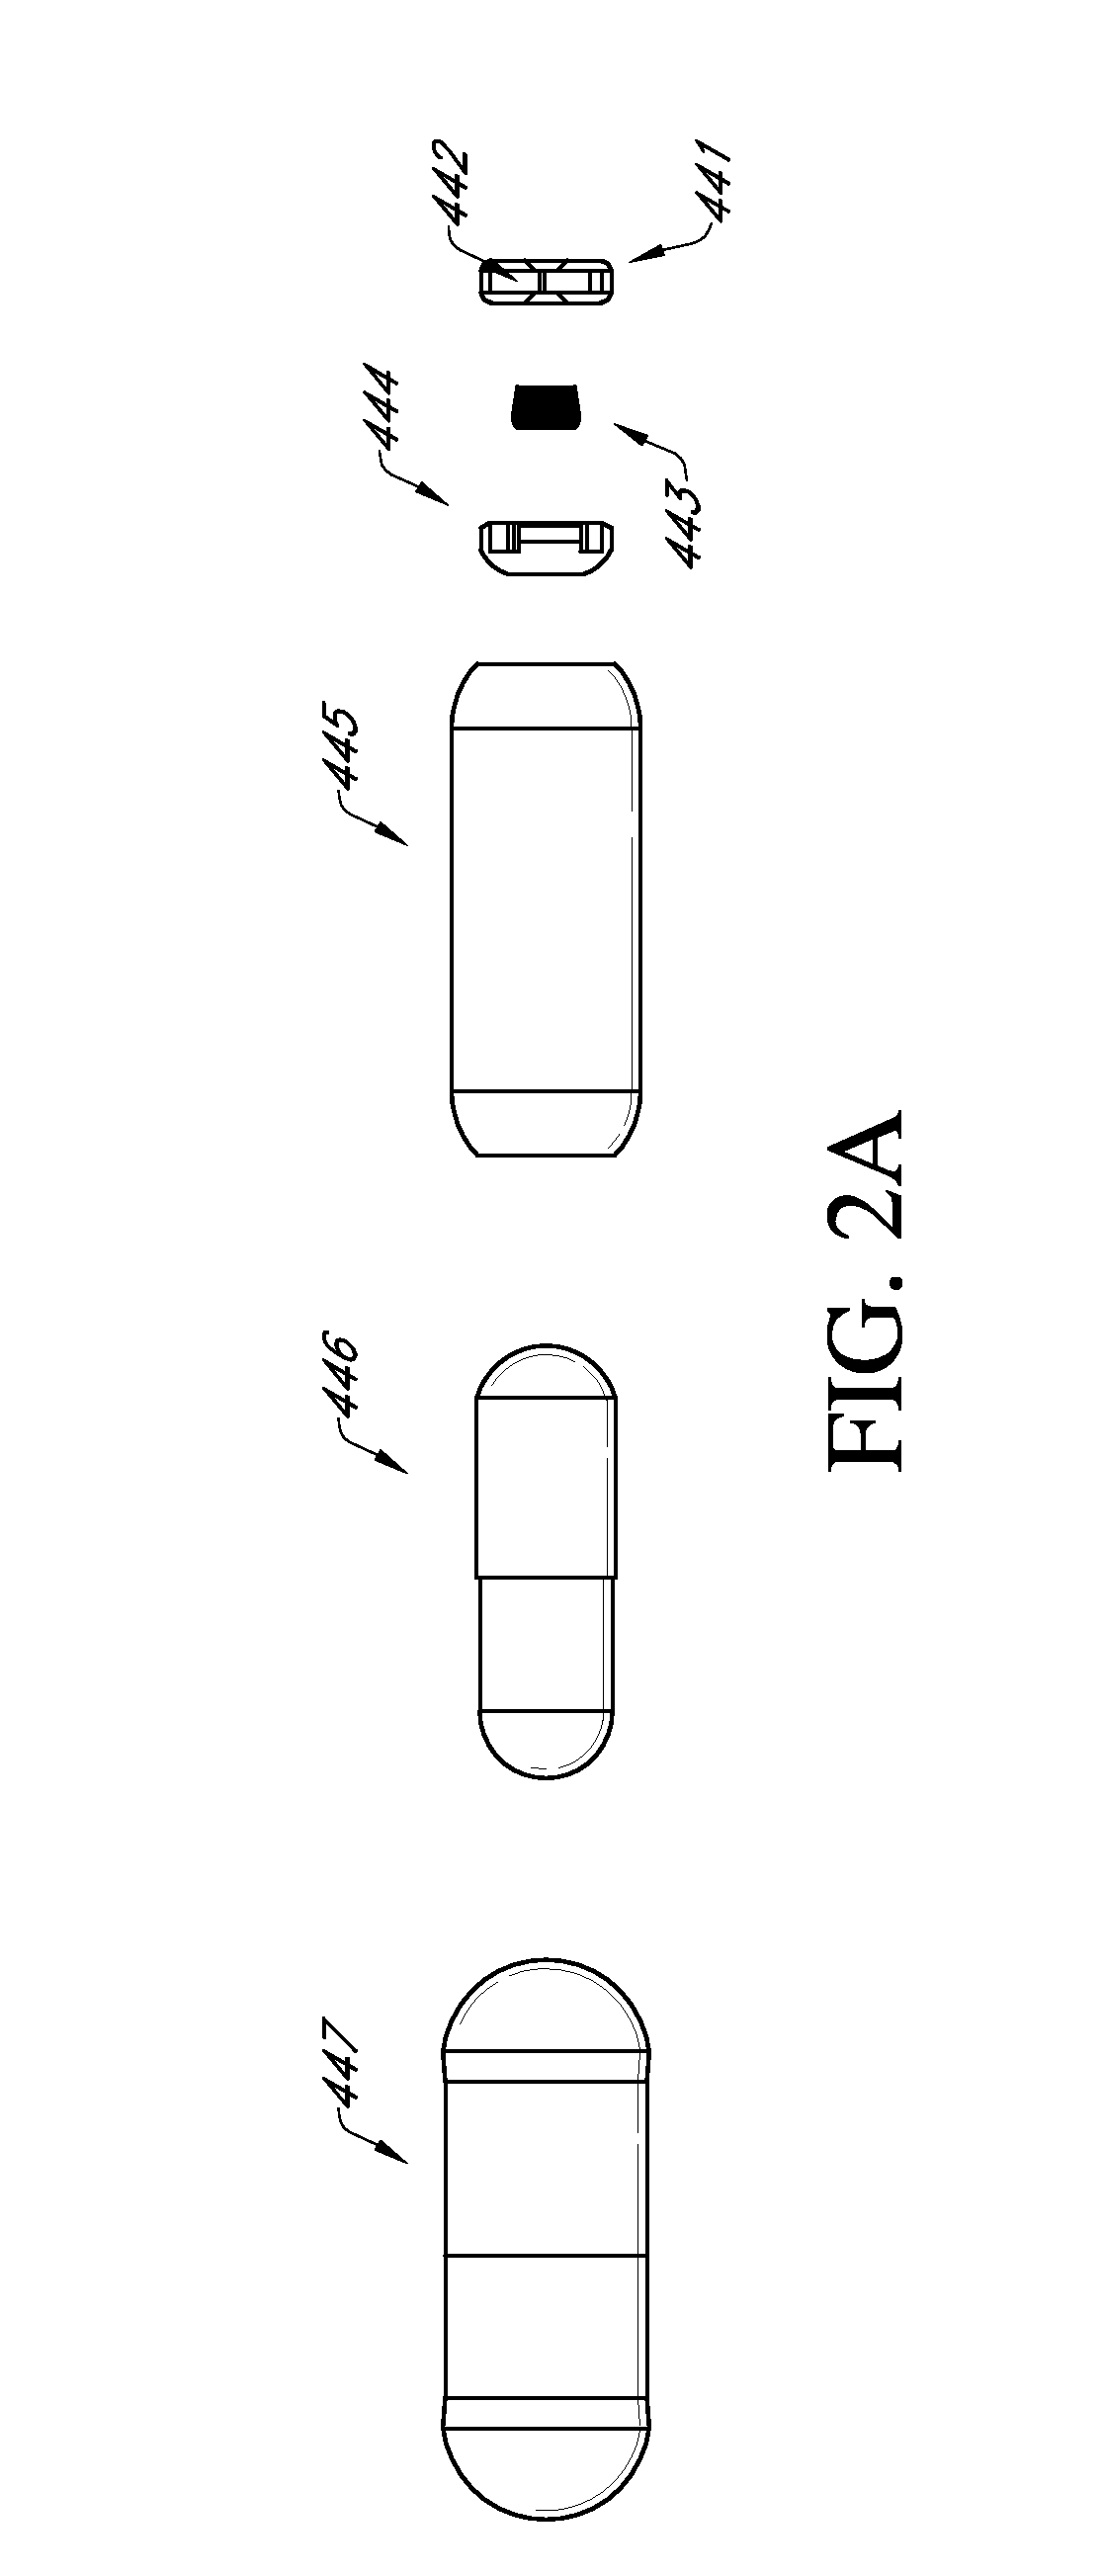 Intragastric volume-occupying device and method for fabricating same